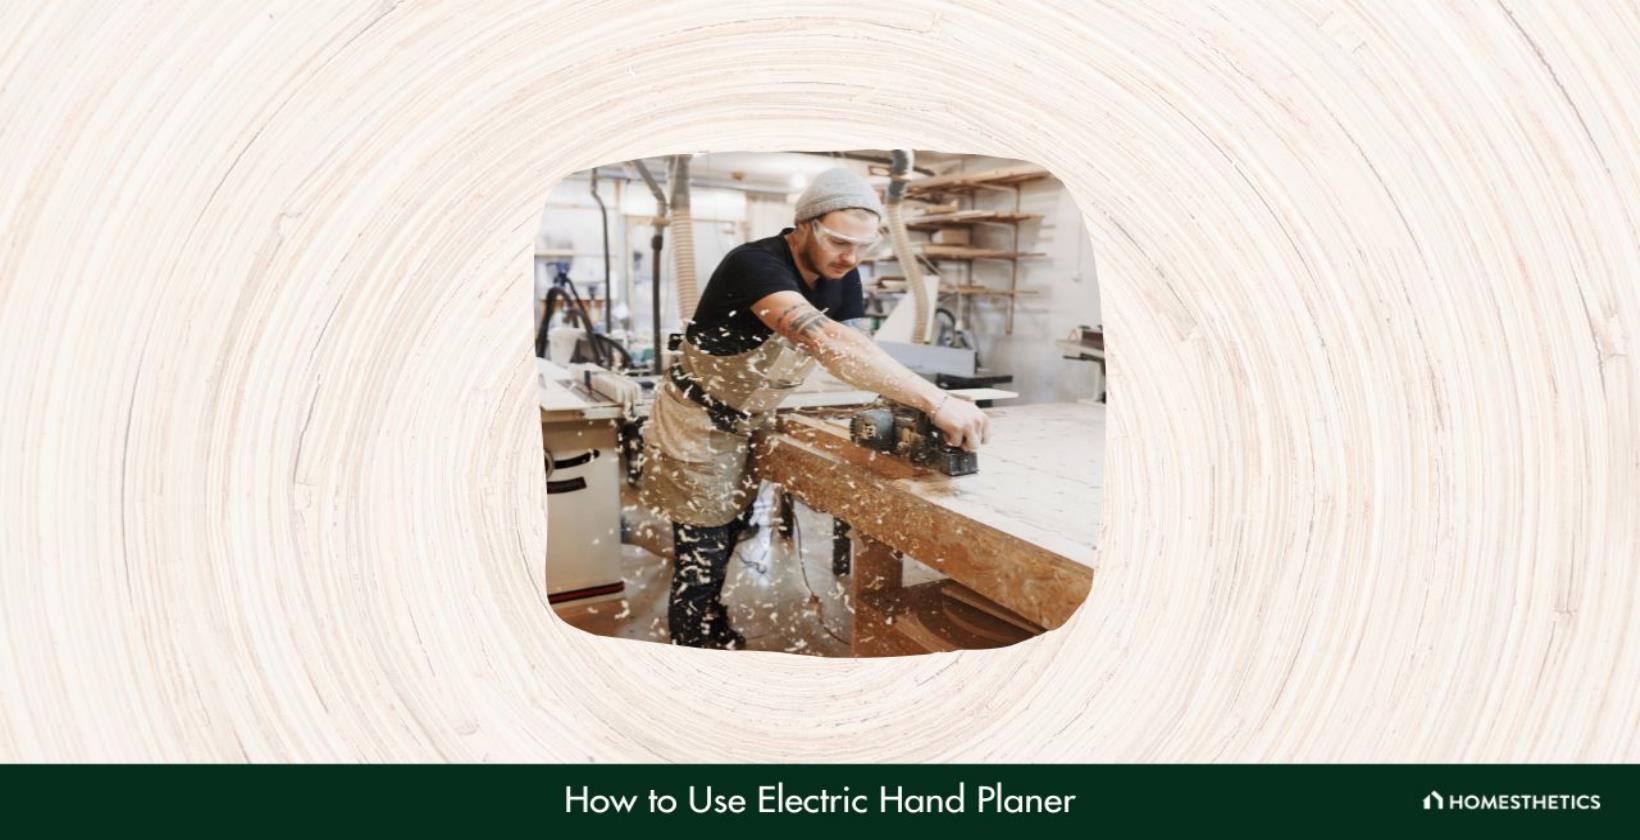 How to Use Electric Hand Planer?